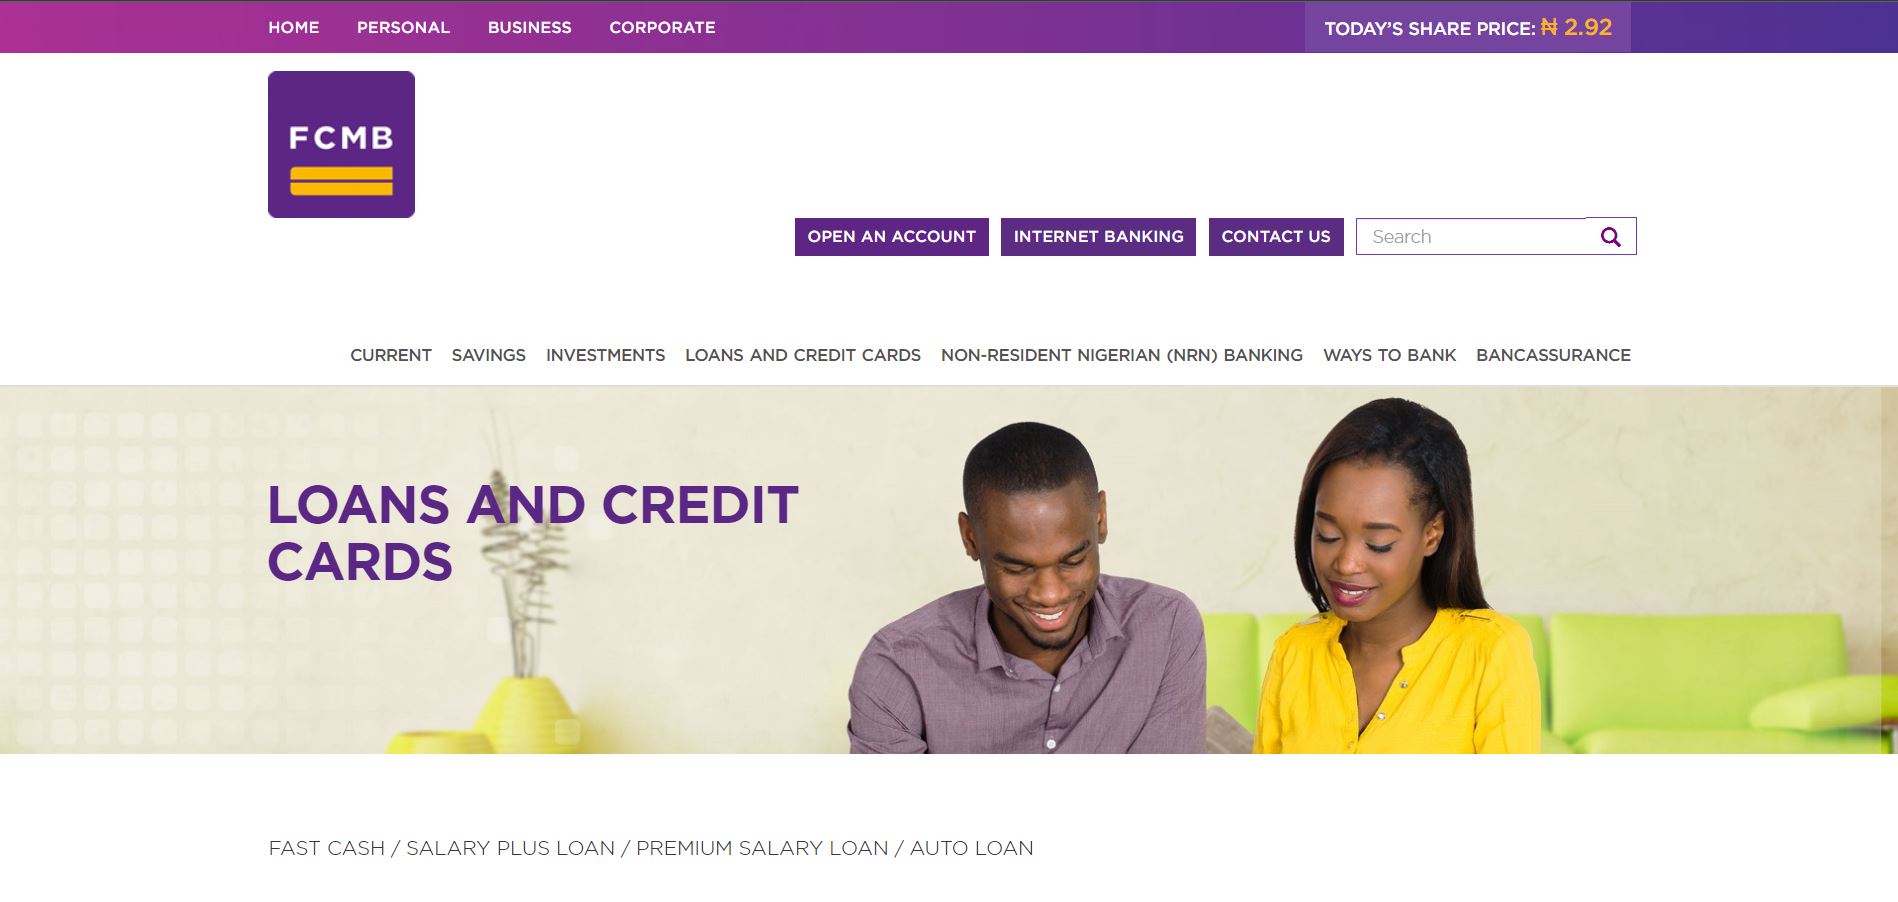 How to get a loan from FCMB